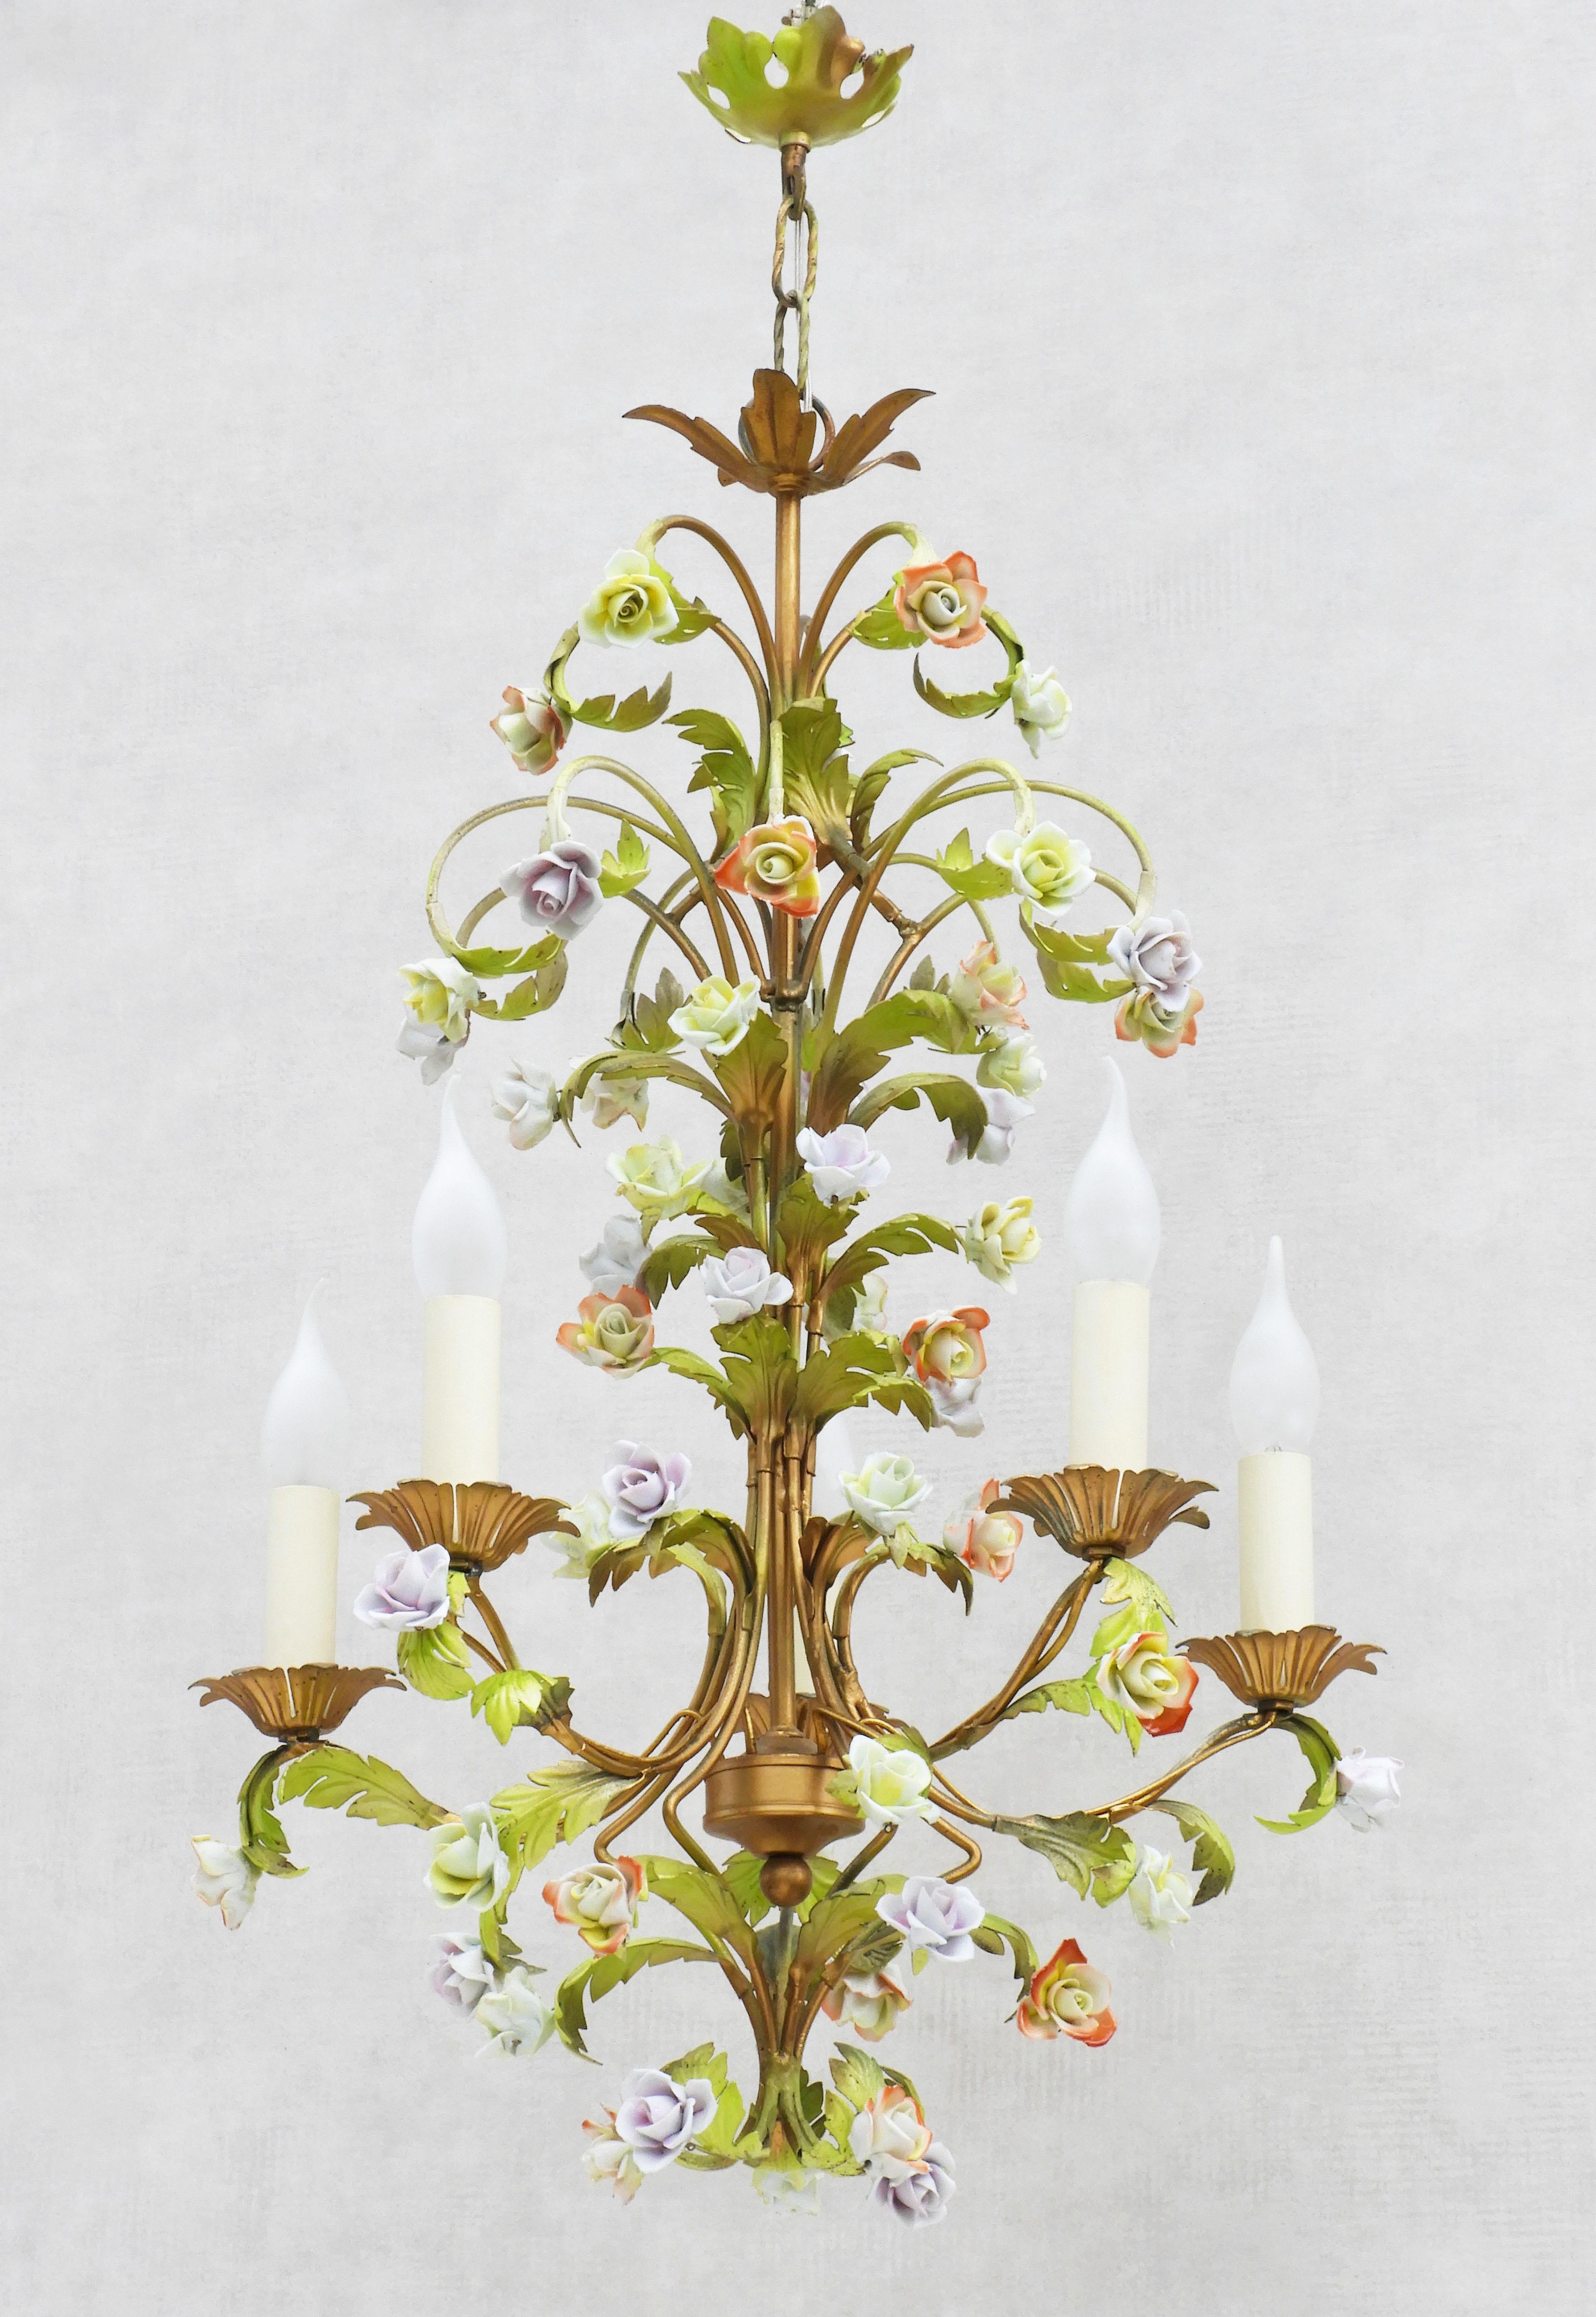 A pretty French midcentury painted tole chandelier with 55 hand-crafted rose flowers and five 'faux' candle lights all nestling amongst green and gold scrolling foliage.
In good vintage condition, completely rewired with all new electrical